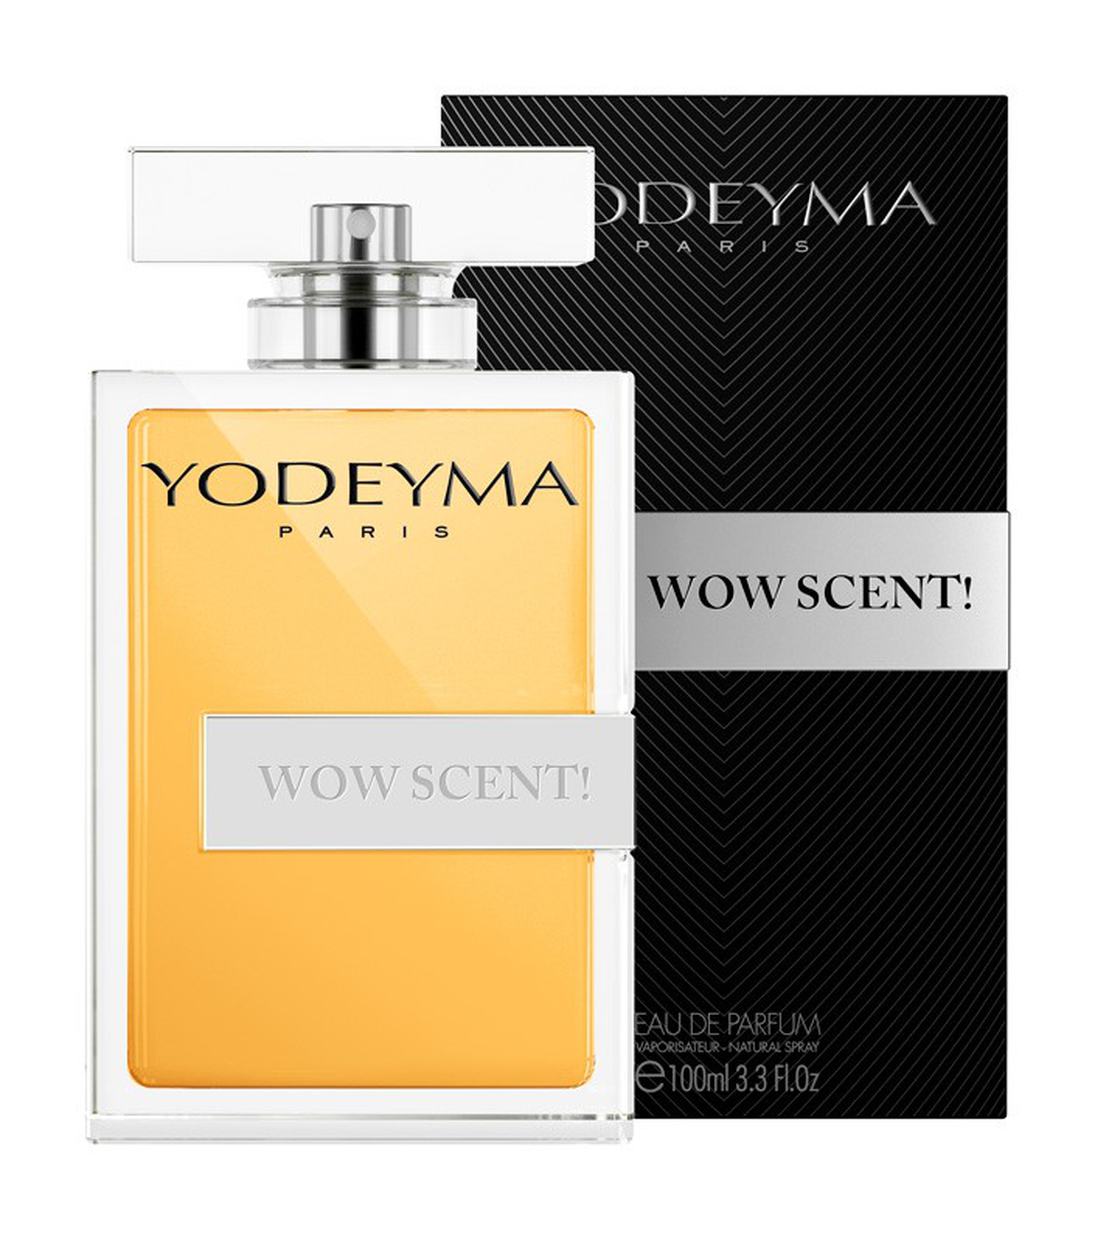 WOW SCENT! 100ml